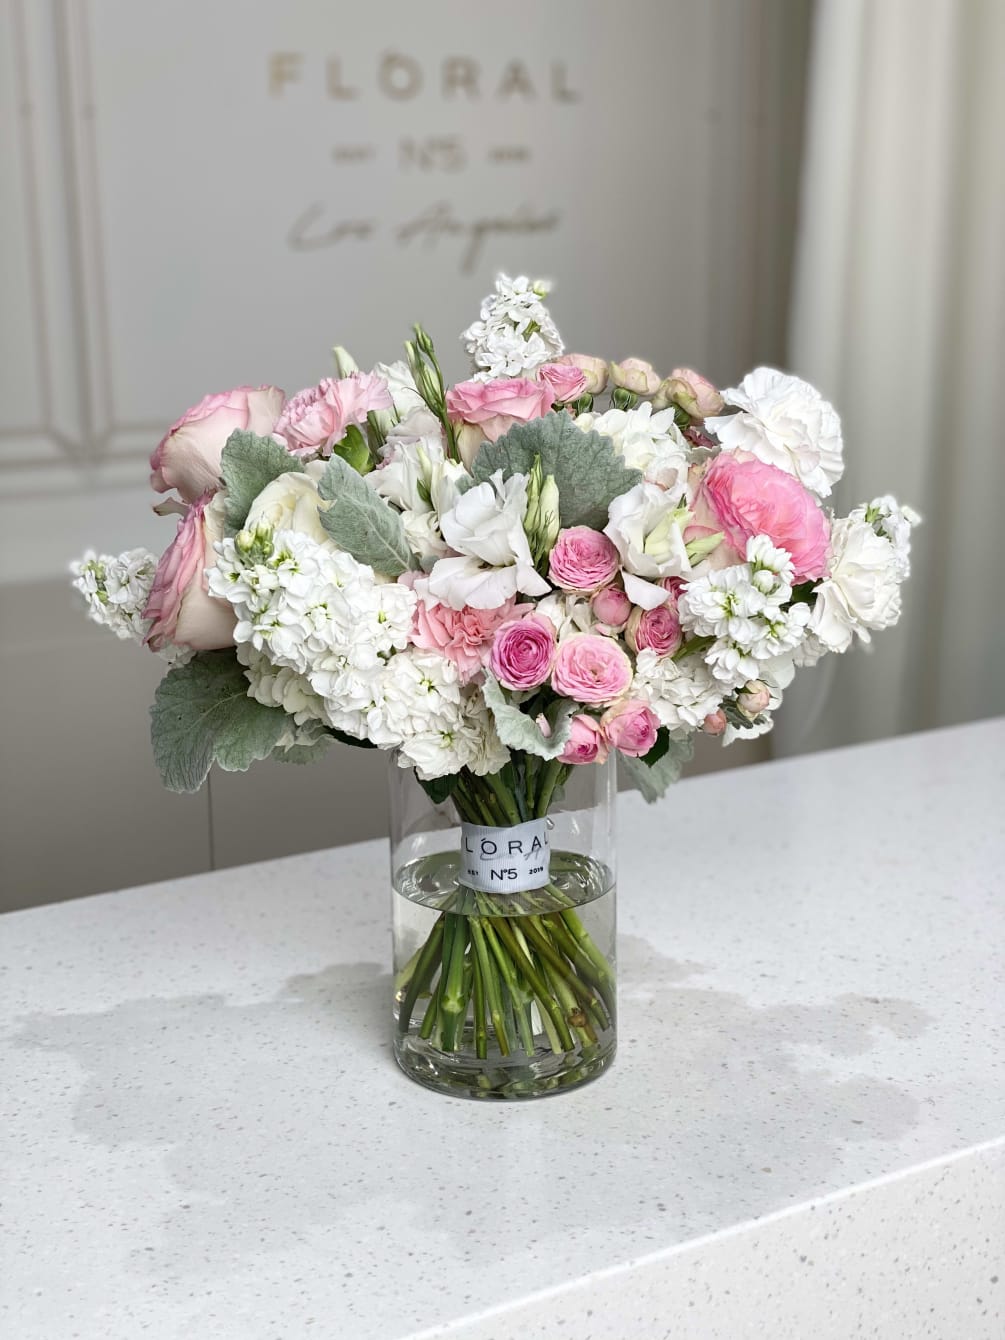 An elegant bouquet with pink roses, white matthiolas and other flowers to